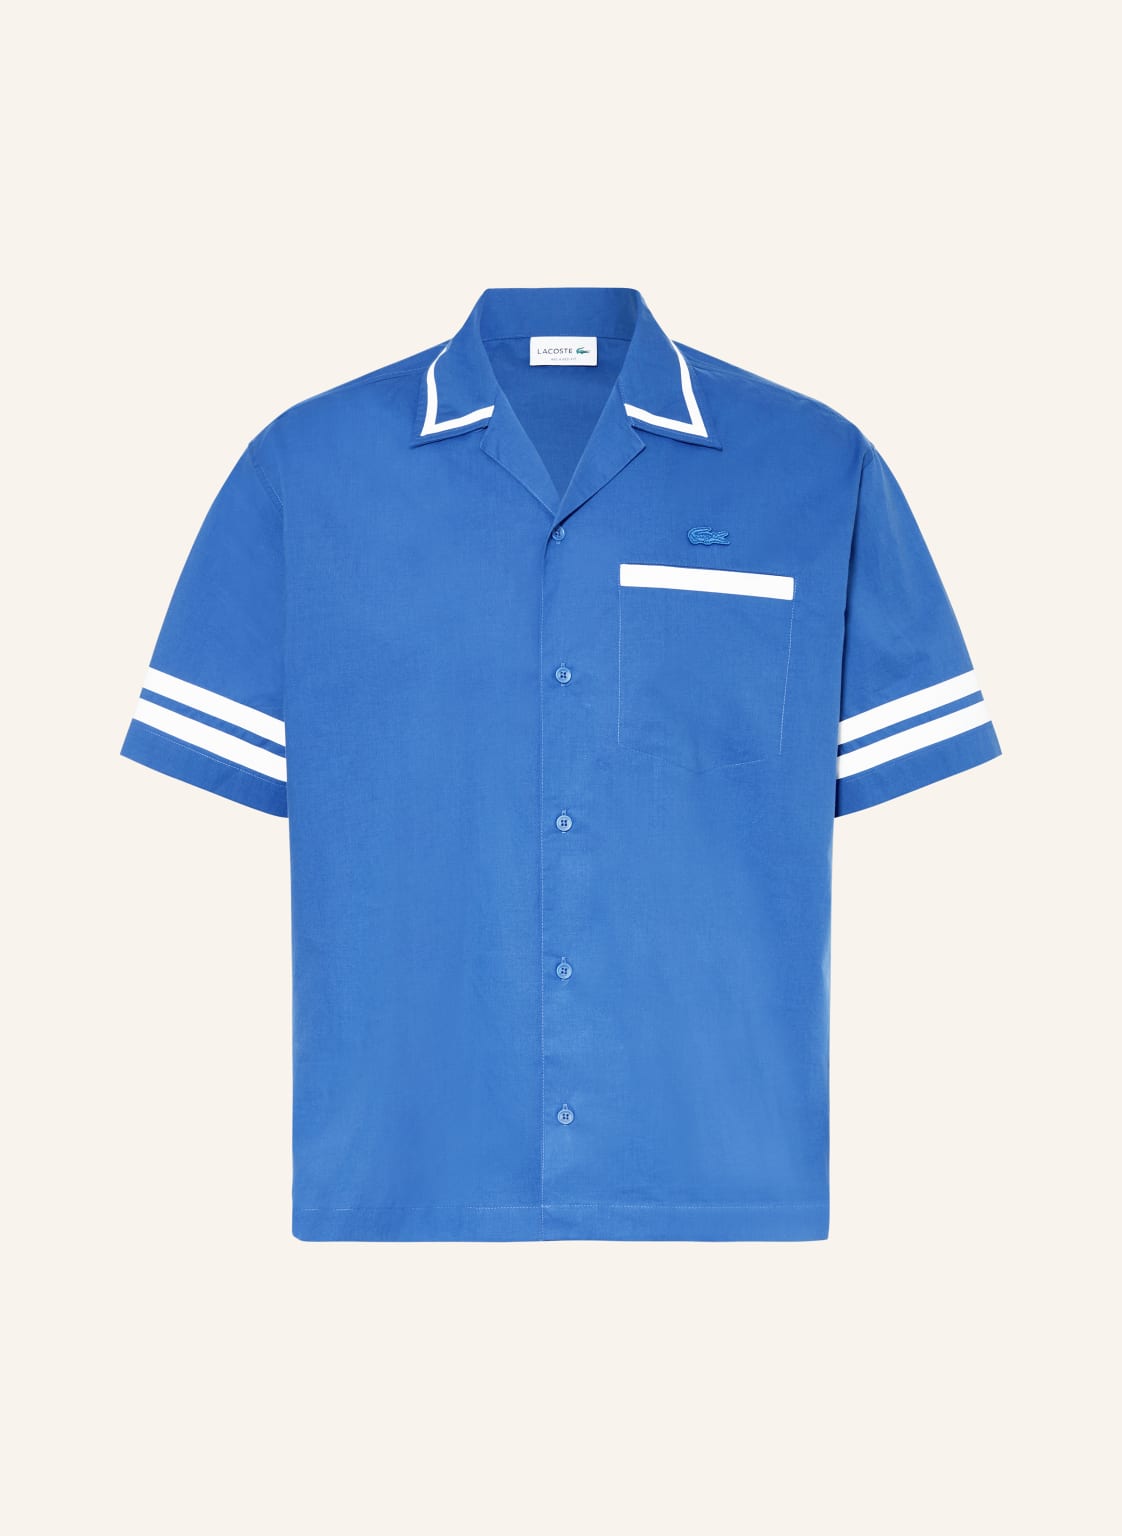 Lacoste Resorthemd Relaxed Fit blau von Lacoste